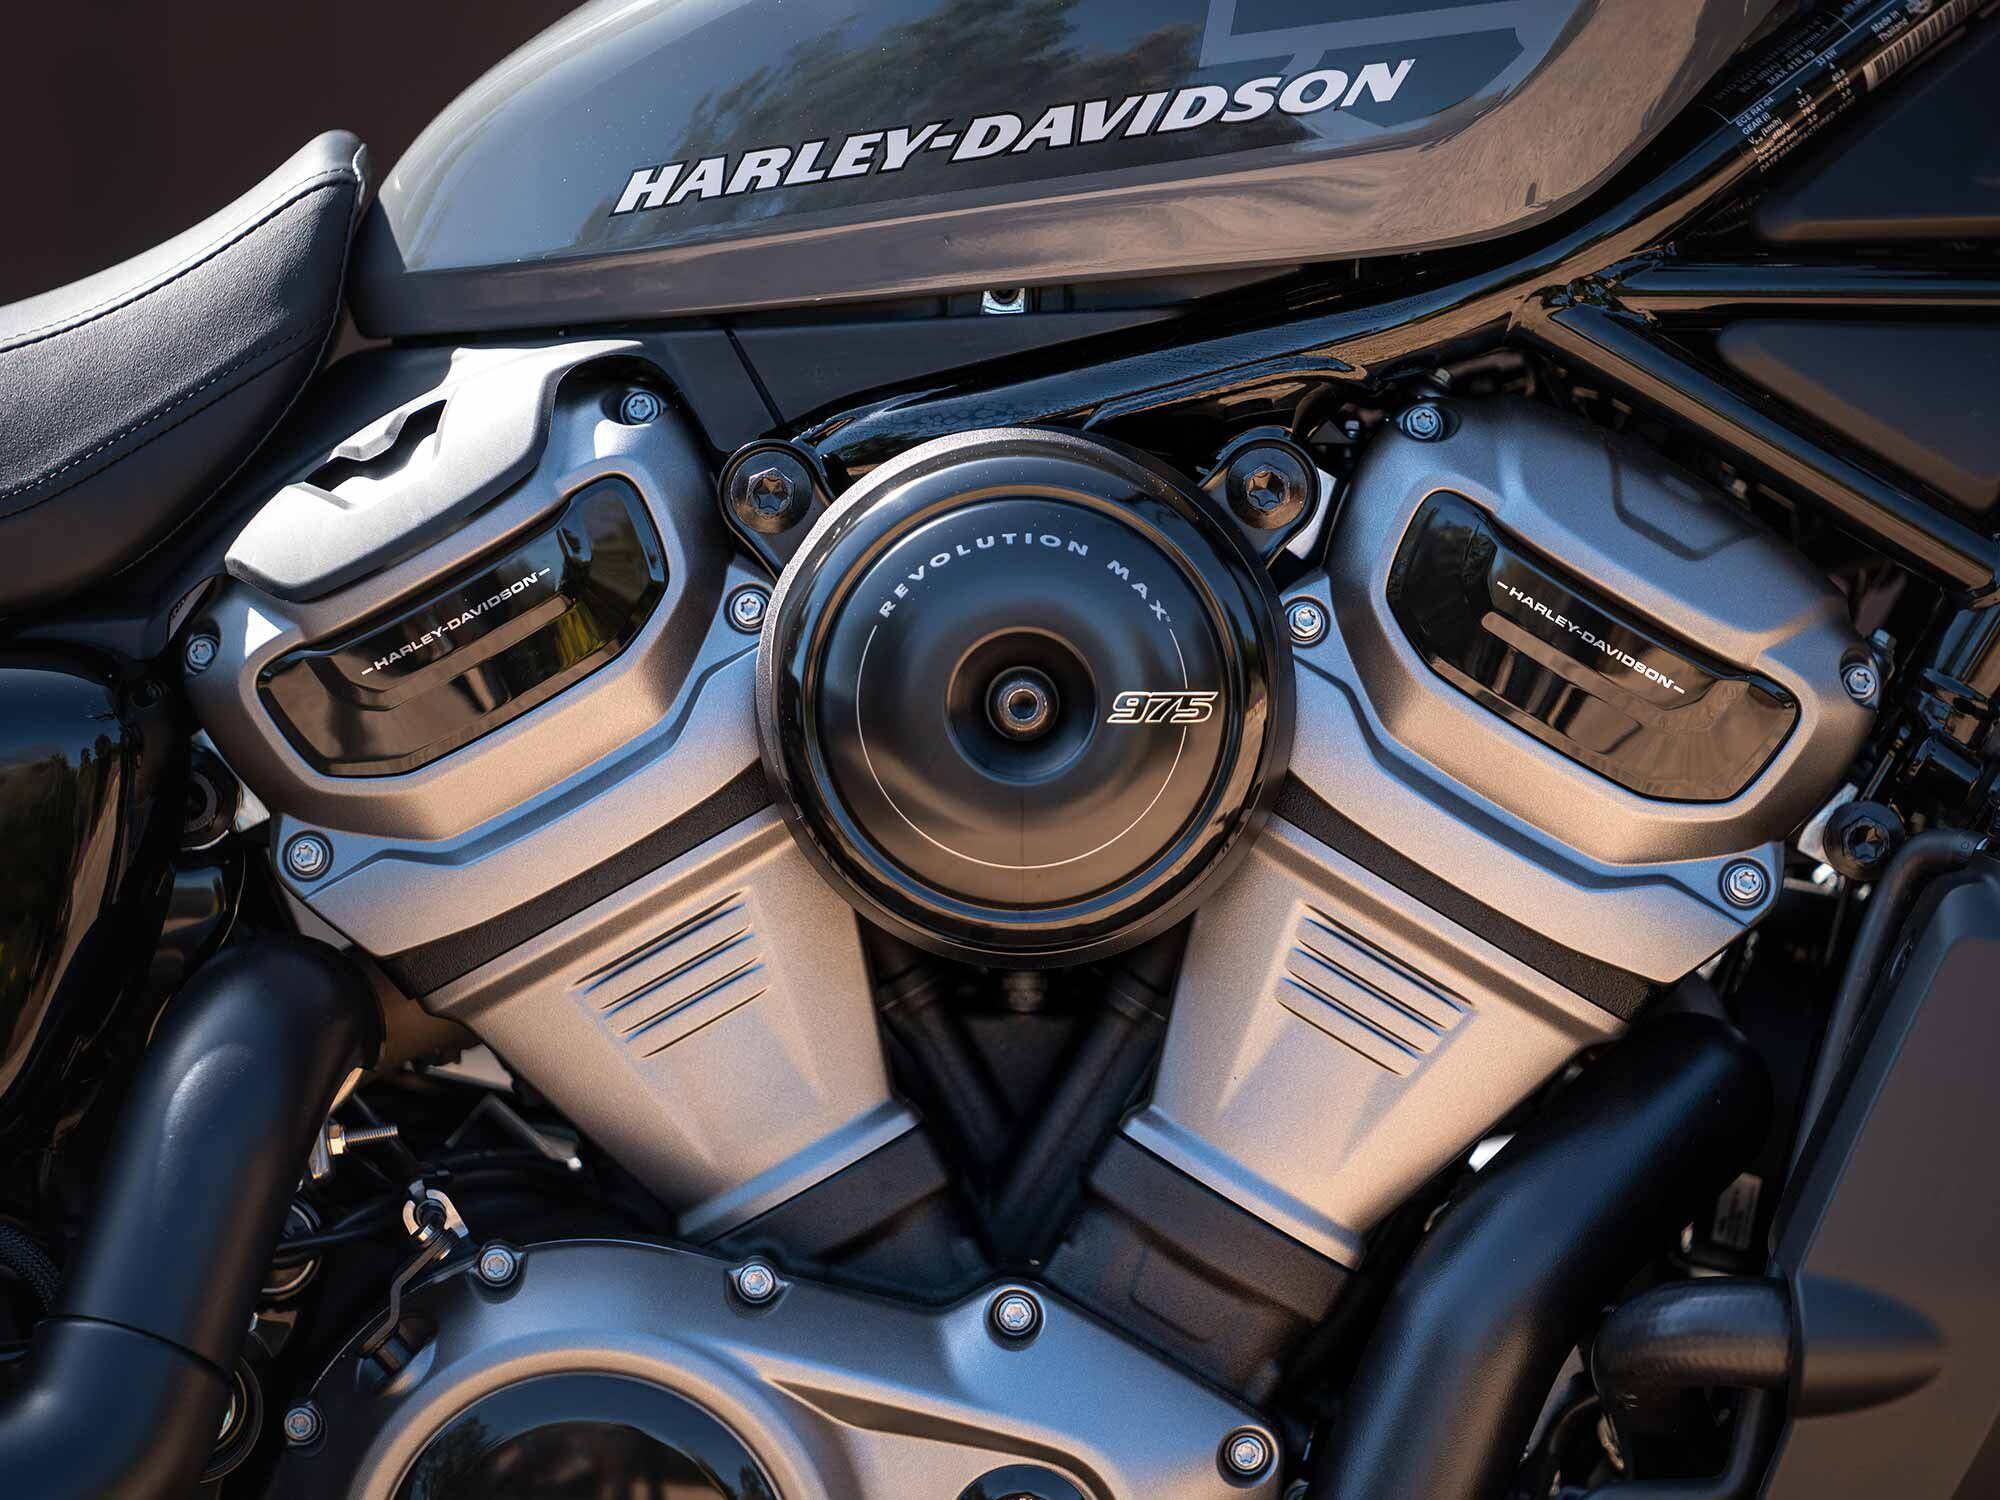 As you would imagine, Harley offers a huge range of accessories including higher and lower bars, forward foot controls, a pillion seat, pegs, sissy bar, various luggage bags, and two optional screens.